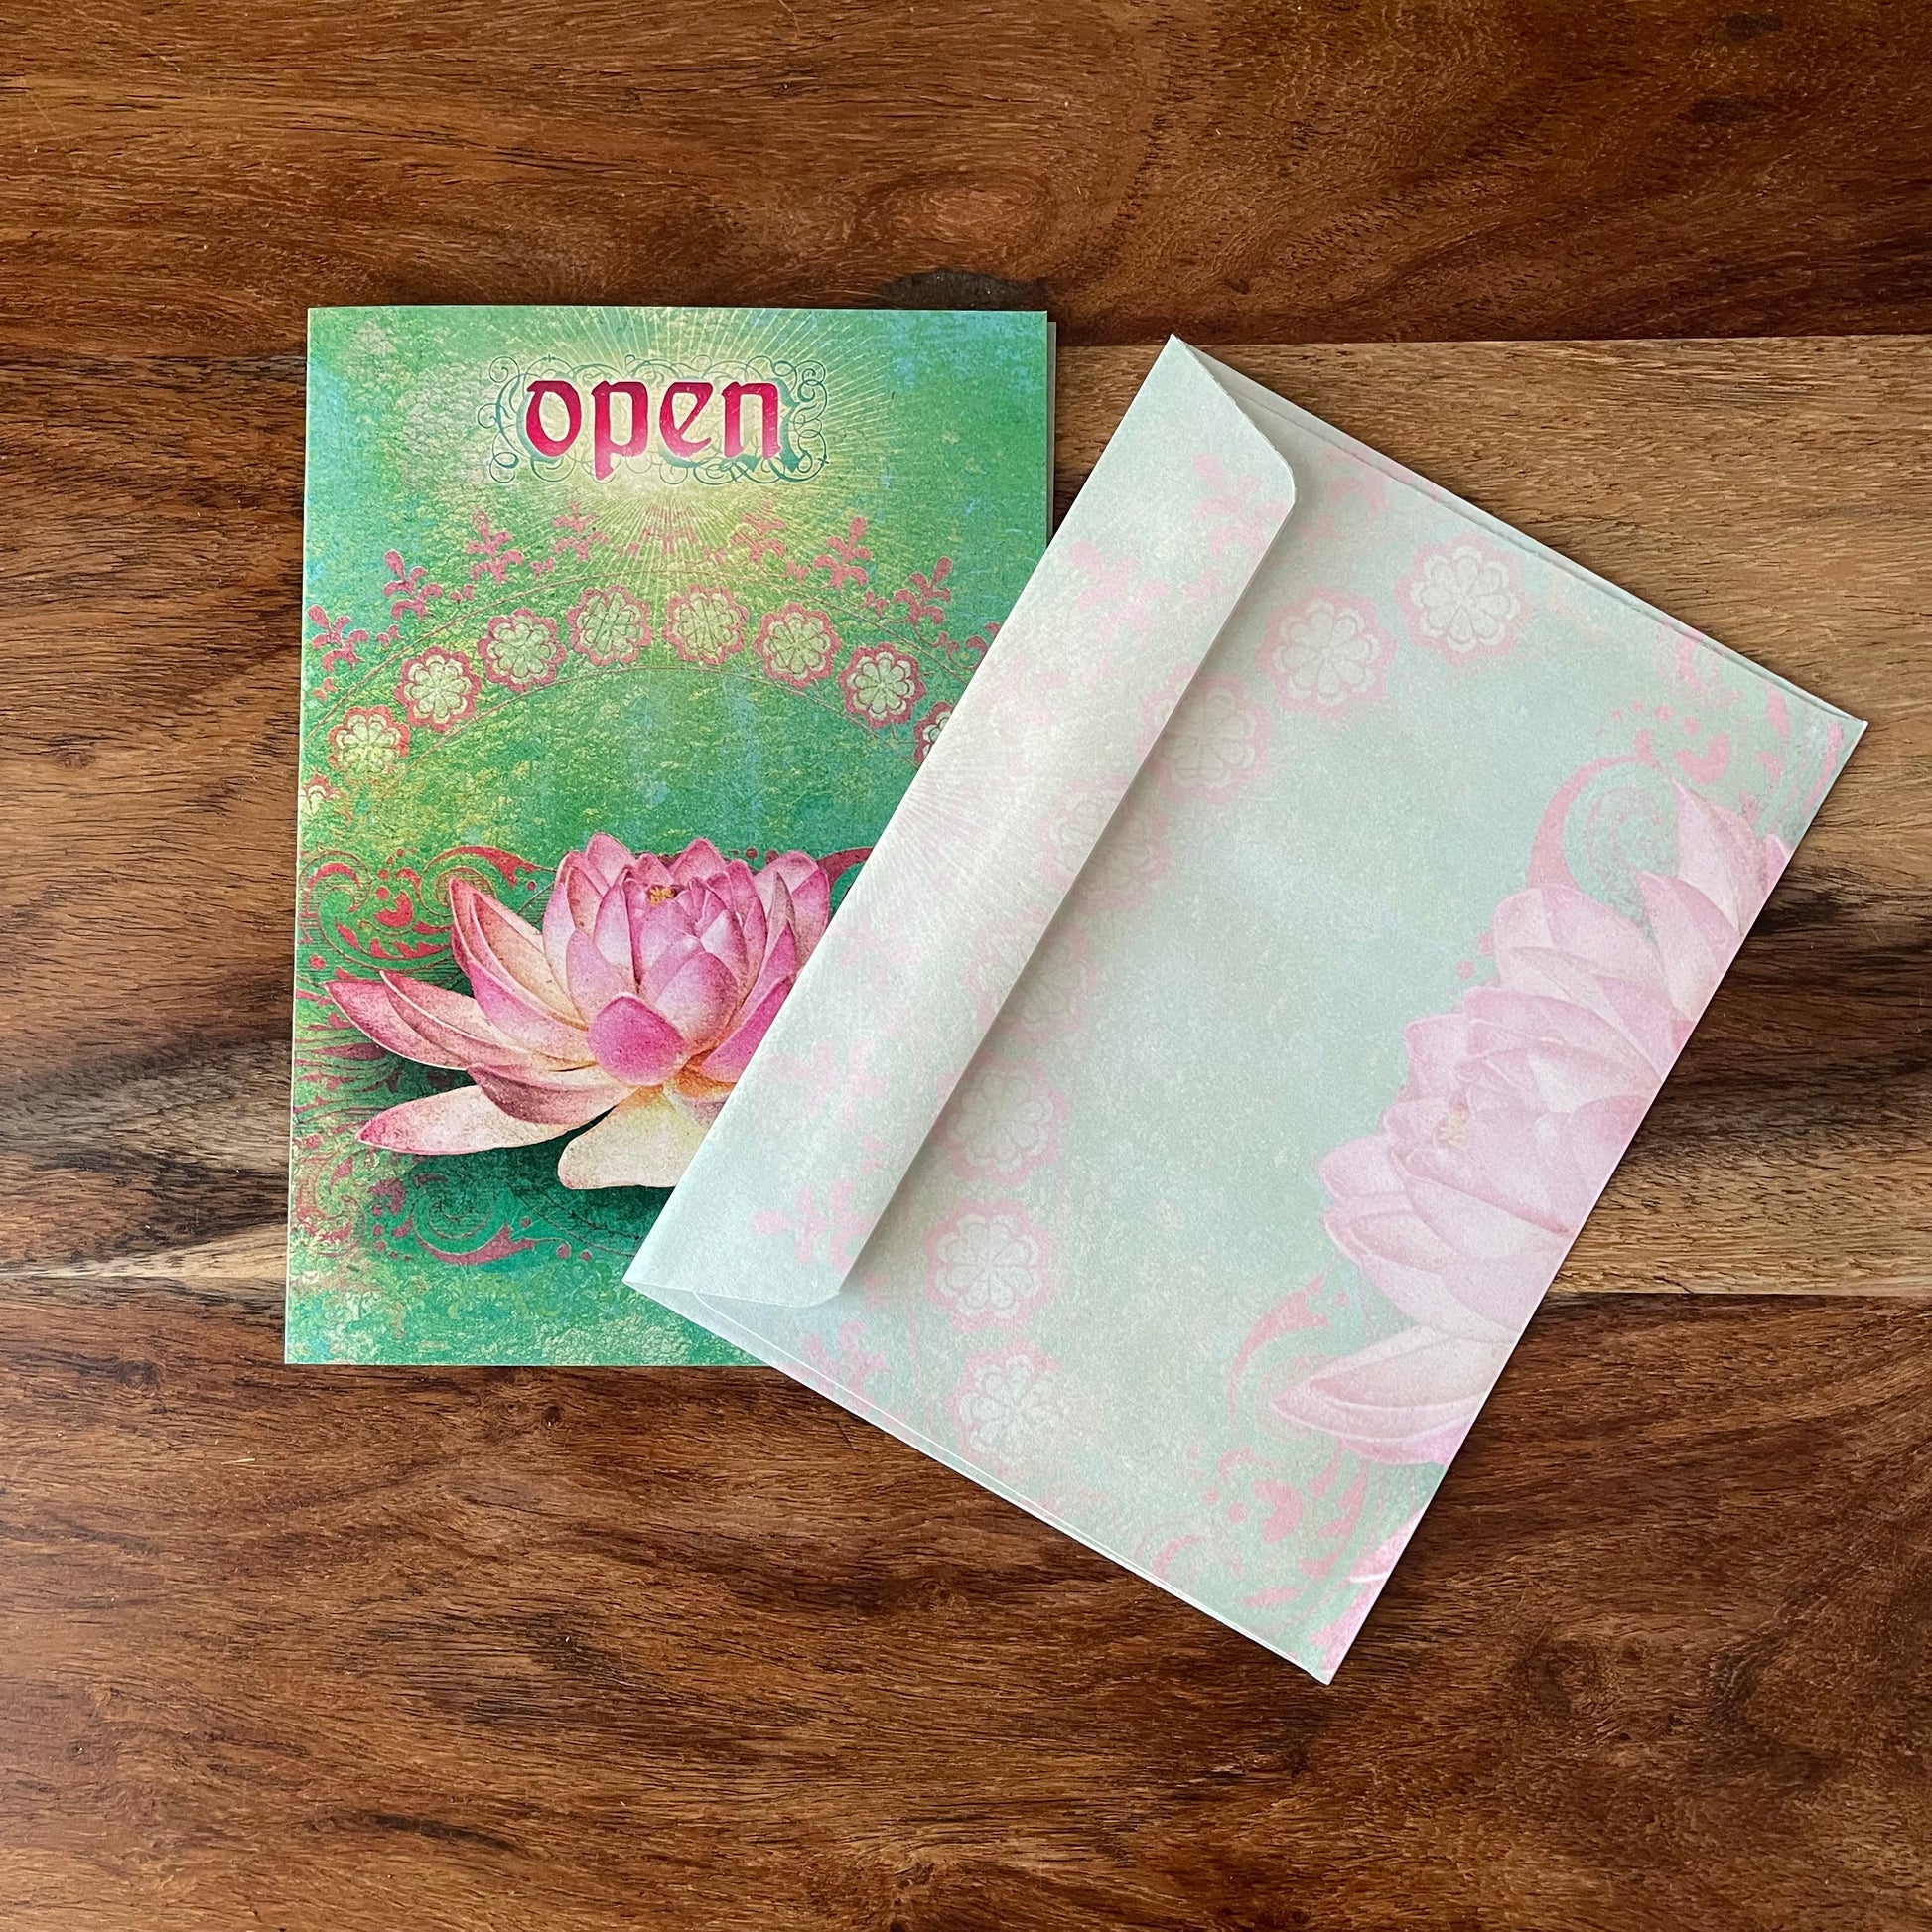 Tree Free Open Greeting Card (Encouragement Message)